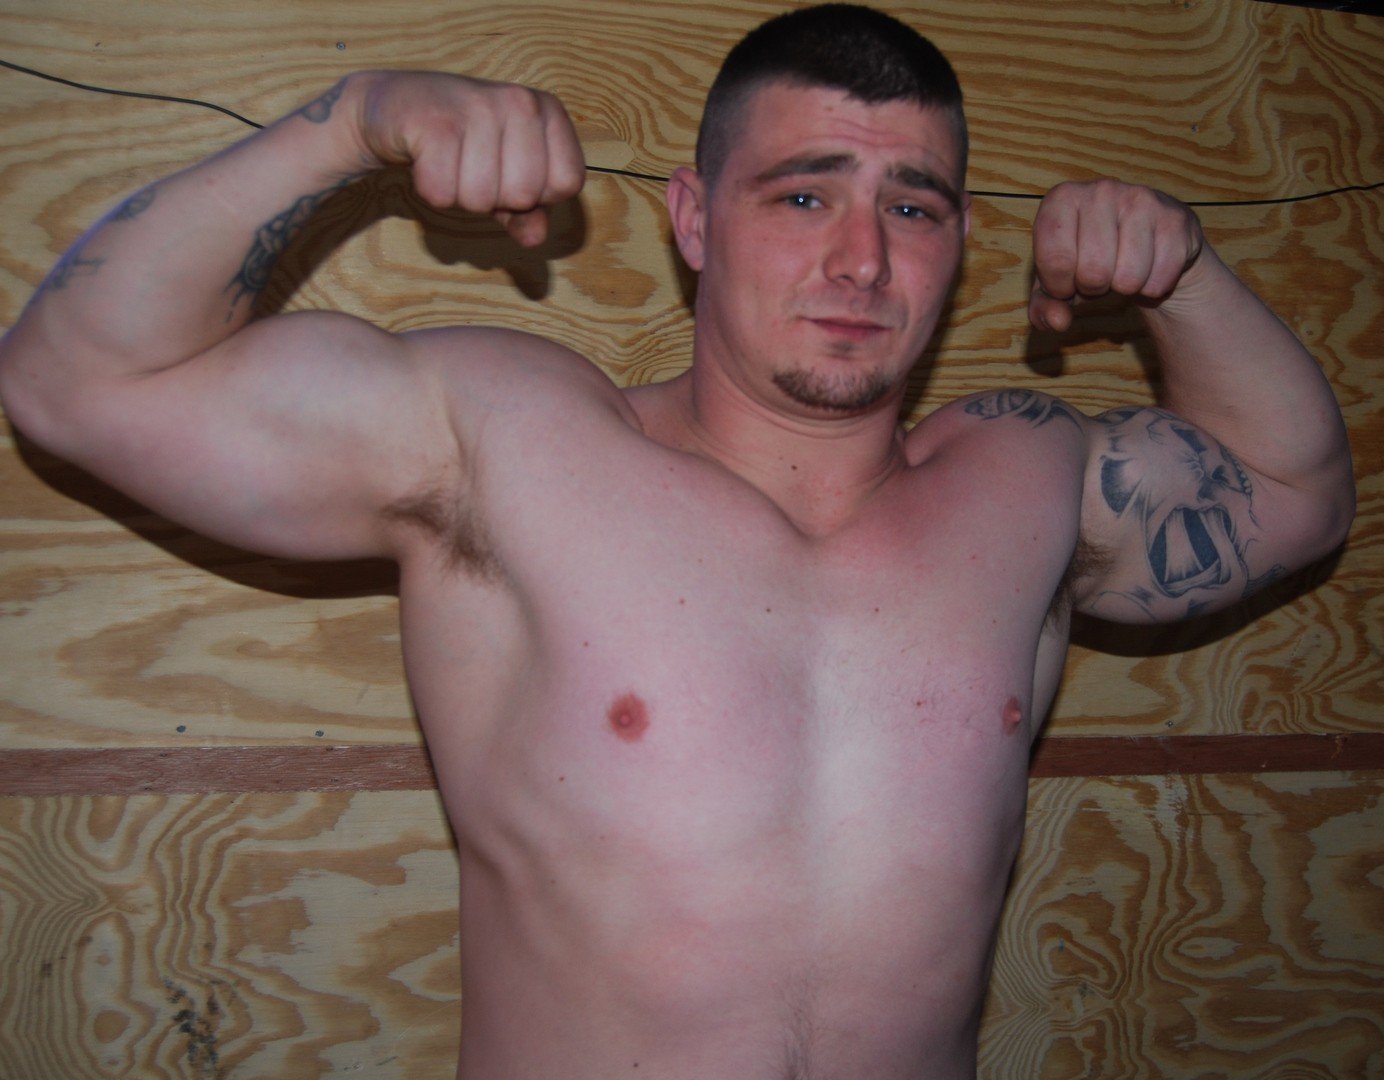 Watch the Photo by Hairy Musclebears with the username @hairymusclebears, posted on September 23, 2019. The post is about the topic GayTumblr. and the text says 'Strong Muscleguy Wrestling from GLOBALFIGHT.com personals #strong #fit #muscle #muscleman #musclemen #muscleguy #strength #fighting #fighter #wrestling #wrestle'